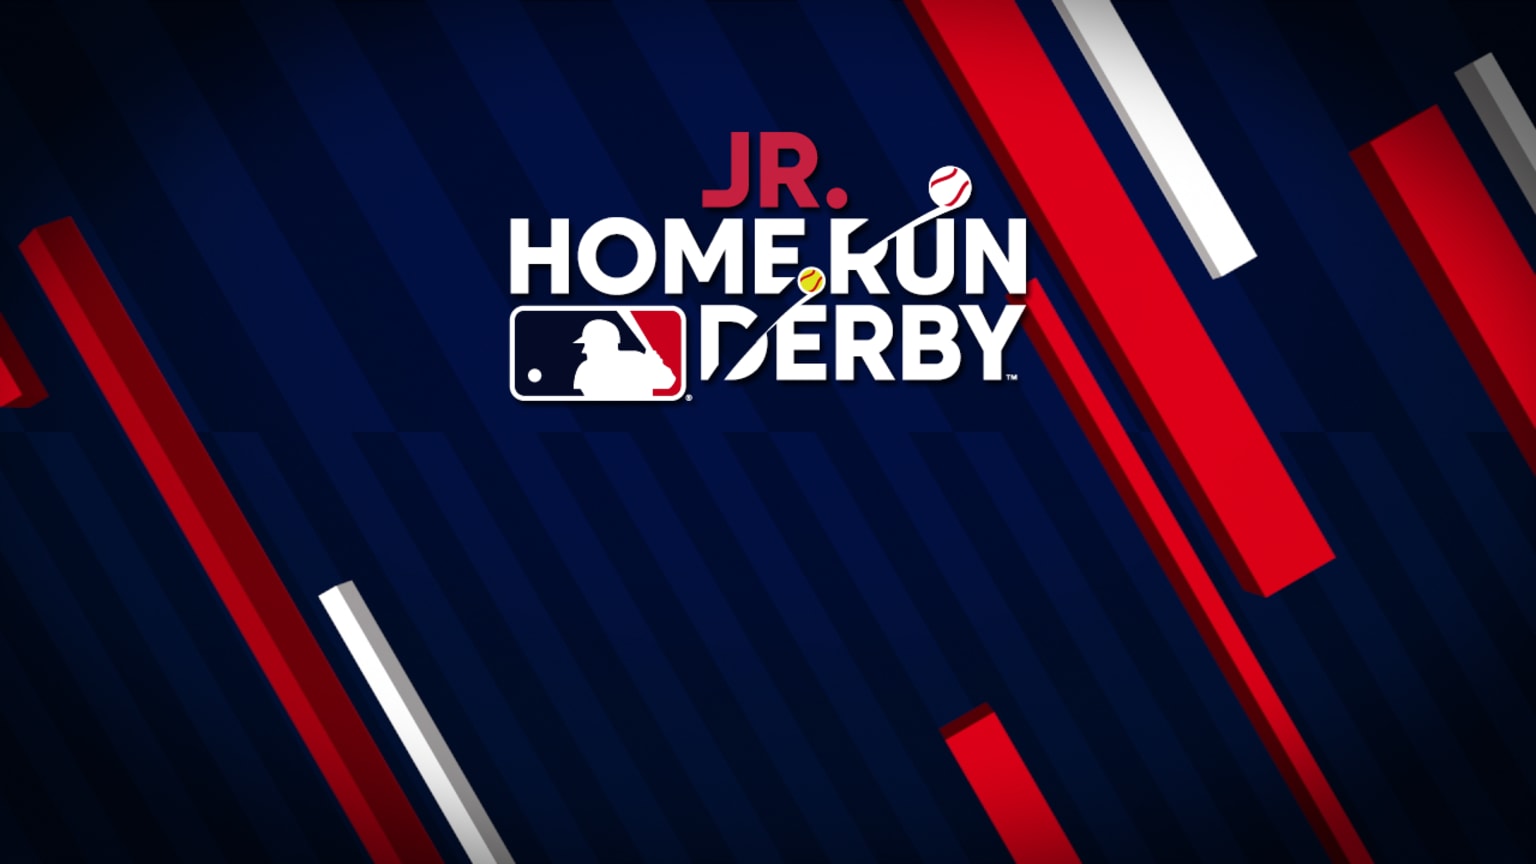 José Ramírez to join 2022 Home Run Derby - Covering the Corner